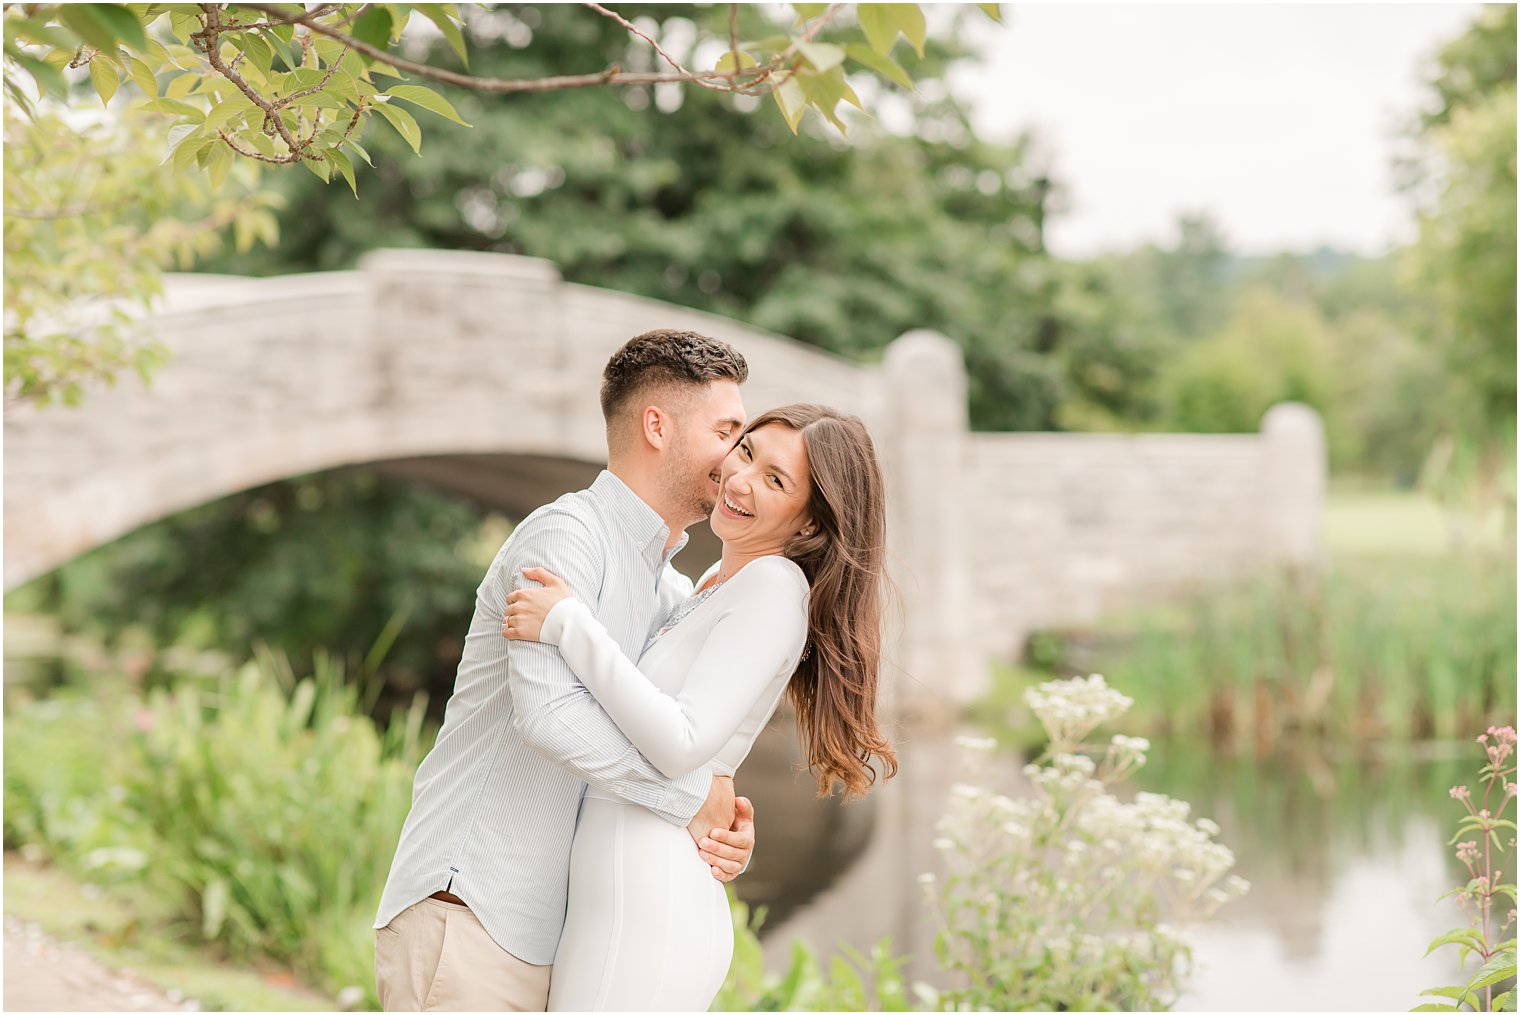 groom nuzzles bride's cheek during Verona Park engagement session